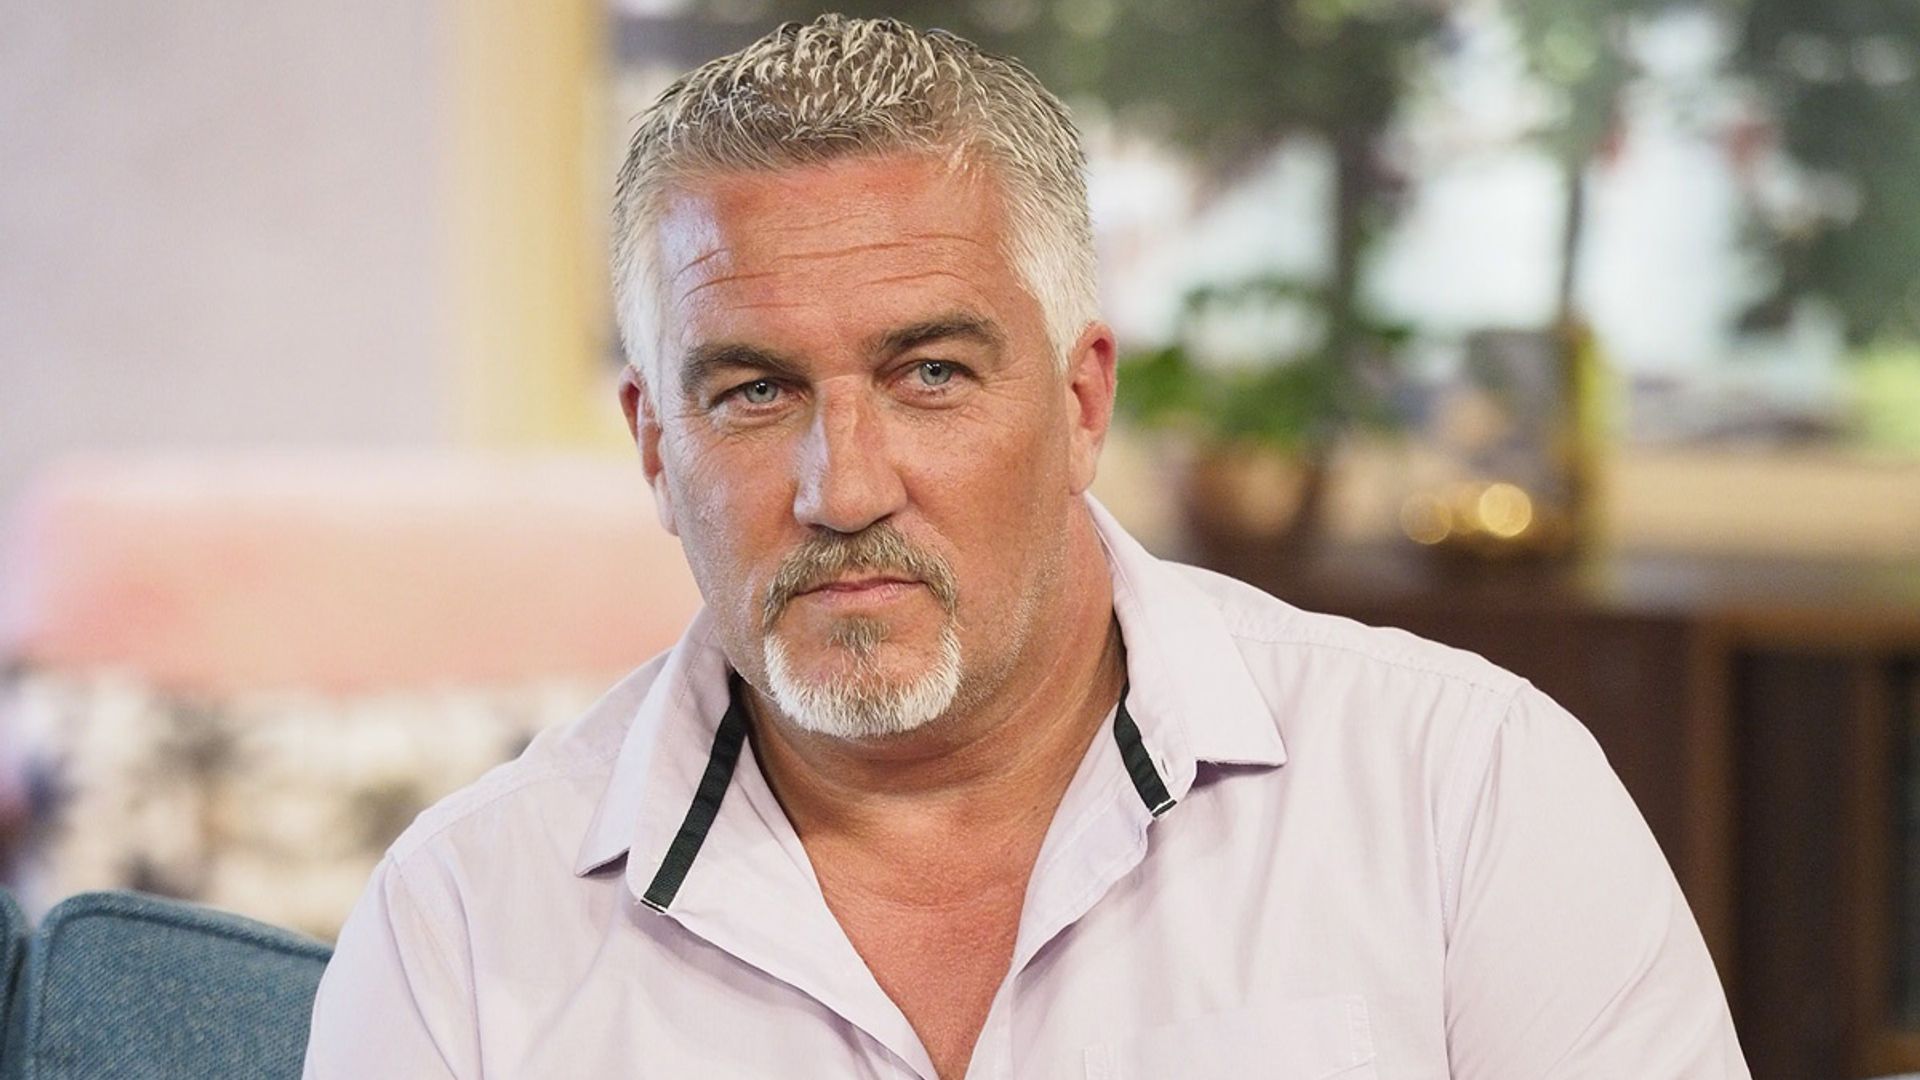 Paul Hollywood takes to social media following ex wife's claims of infidelities